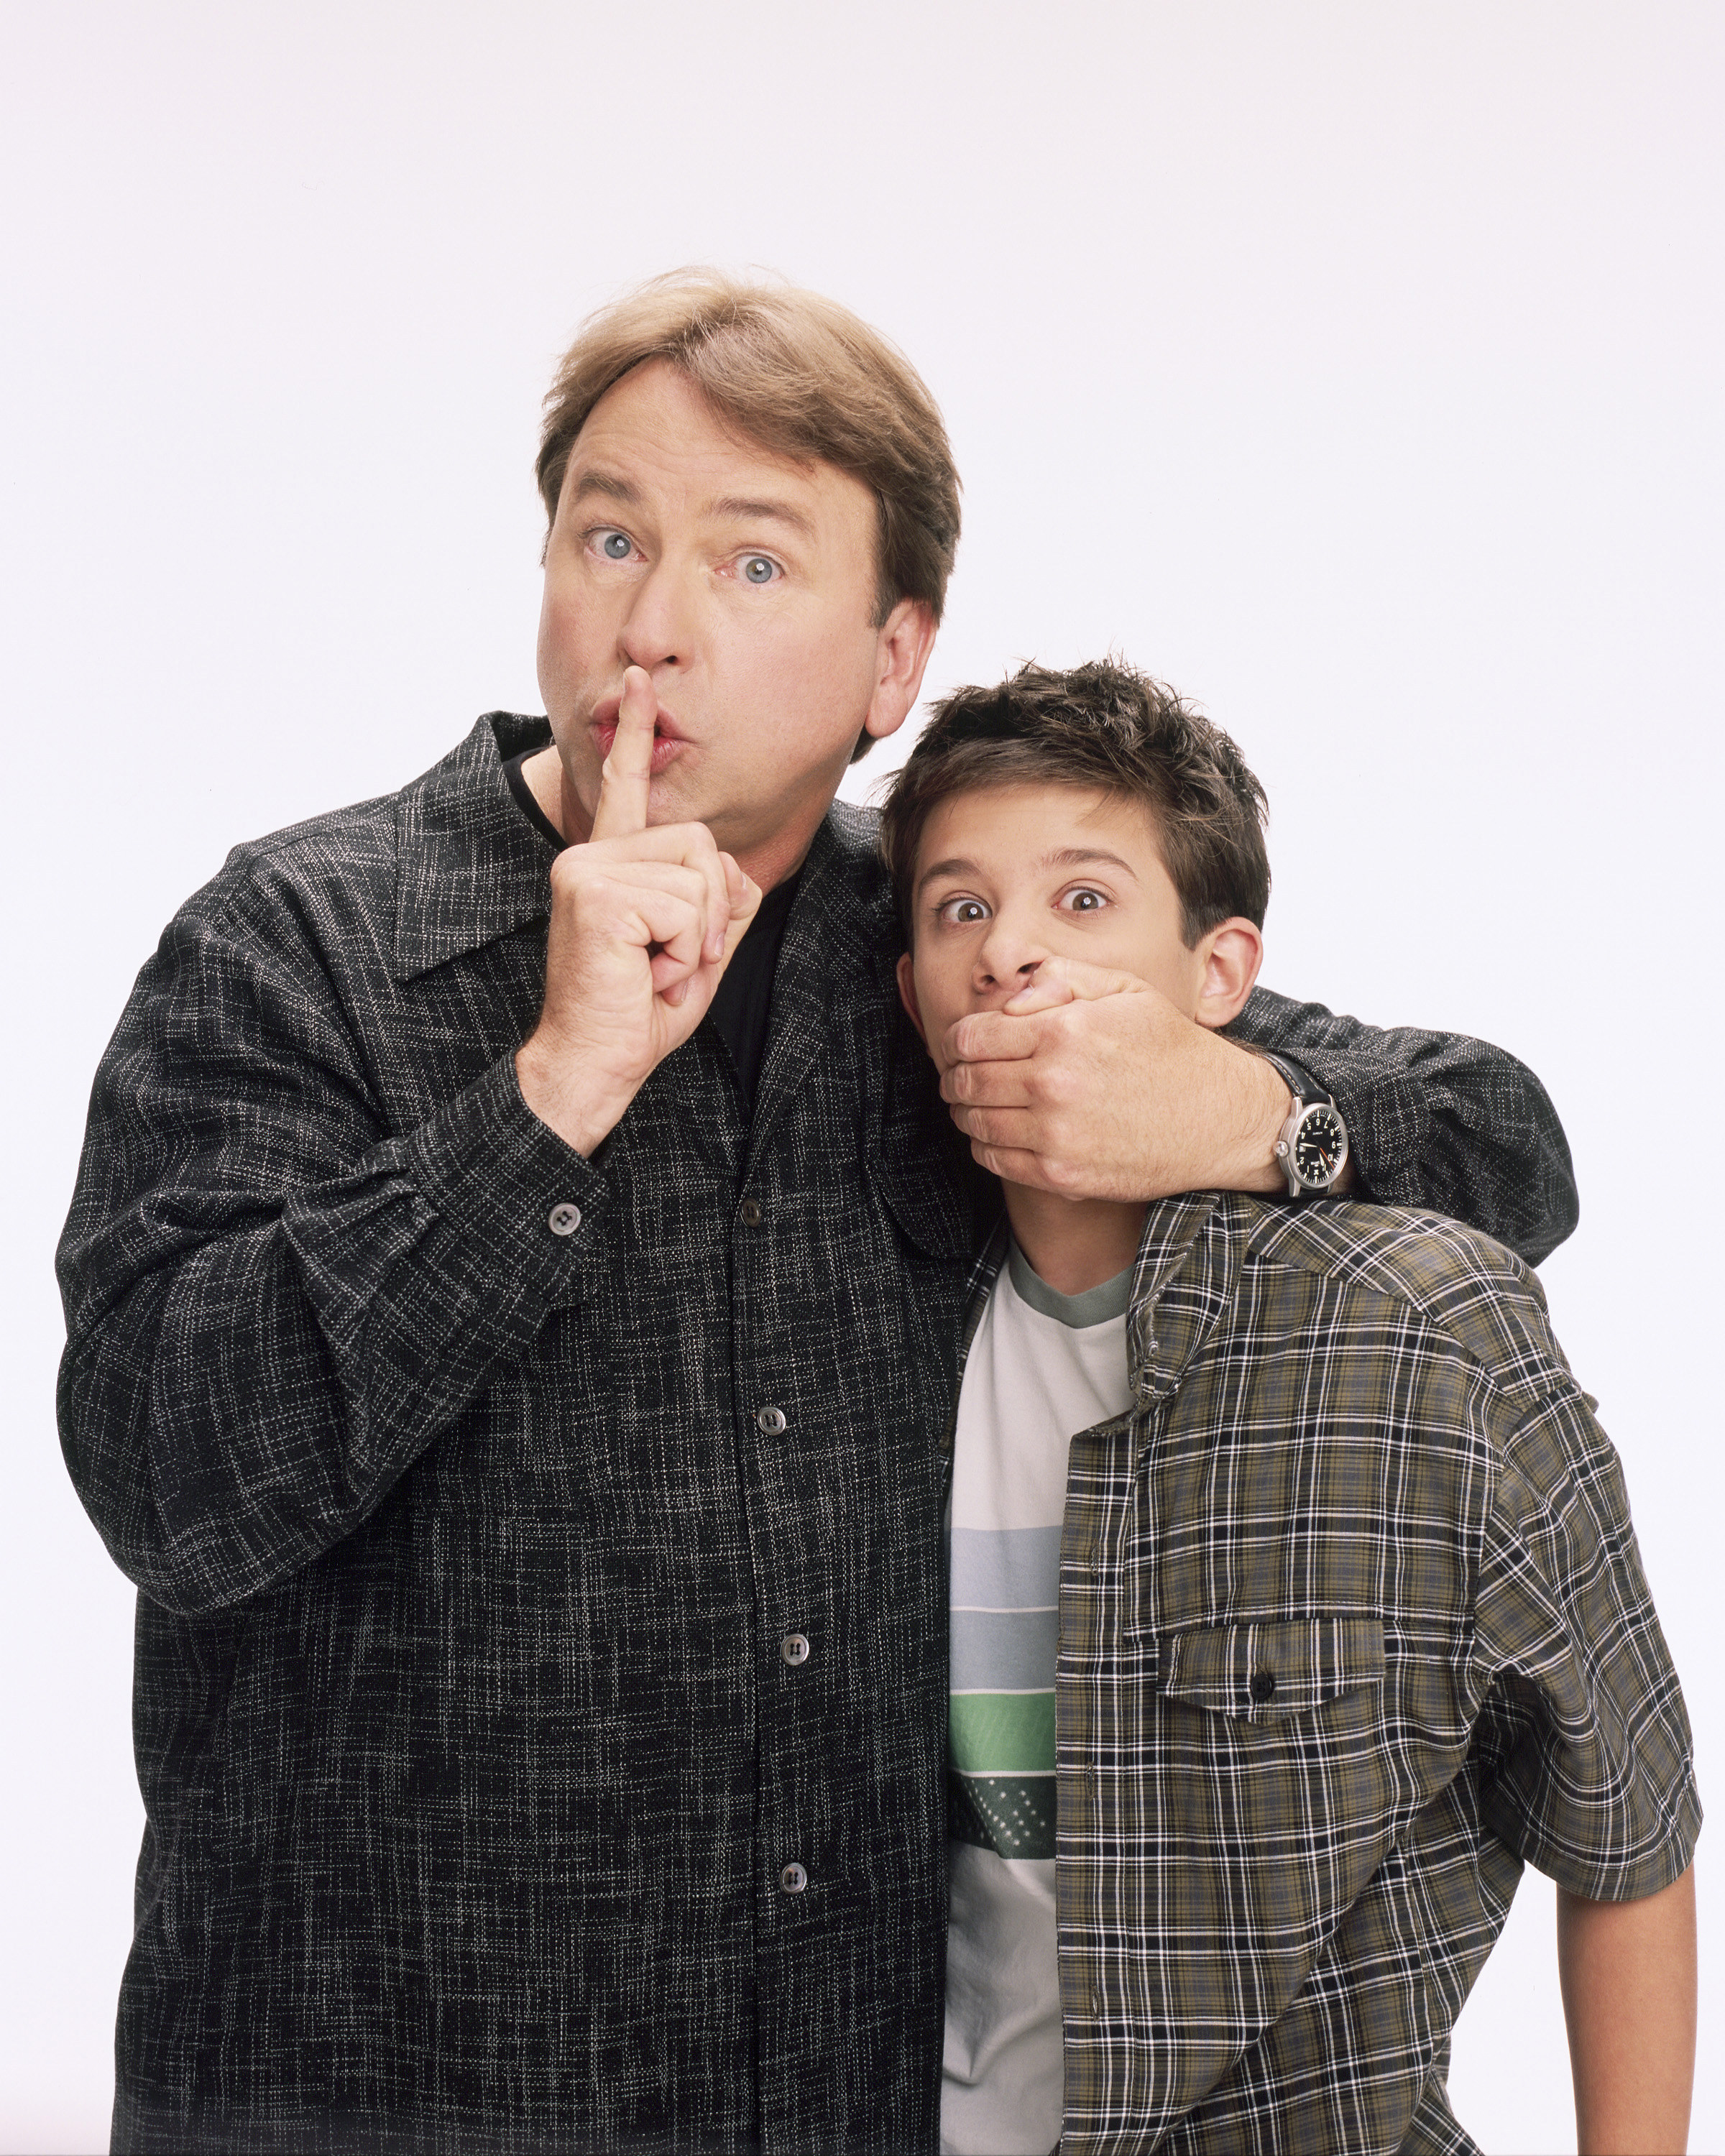 Still of John Ritter and Martin Spanjers in 8 Simple Rules... for Dating My Teenage Daughter (2002)